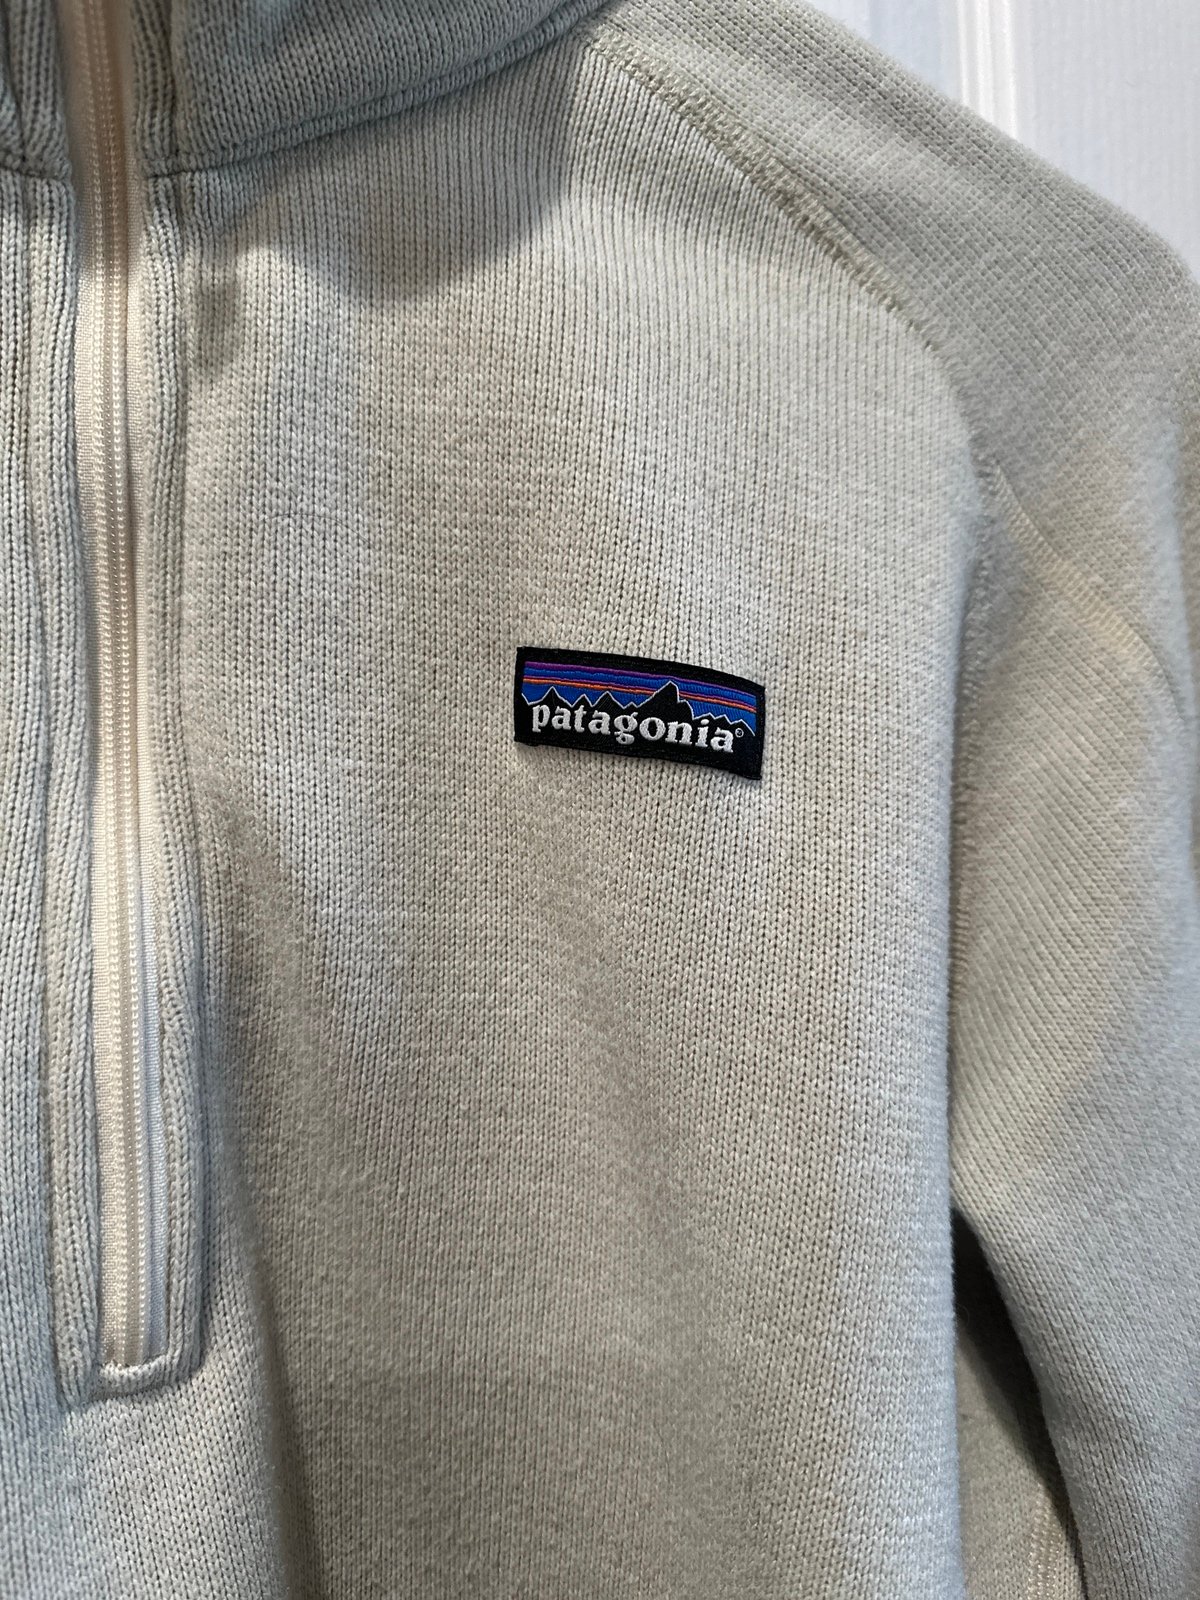 large selection Patagonia better sweater quarter zip fja8Qrn3m well sale